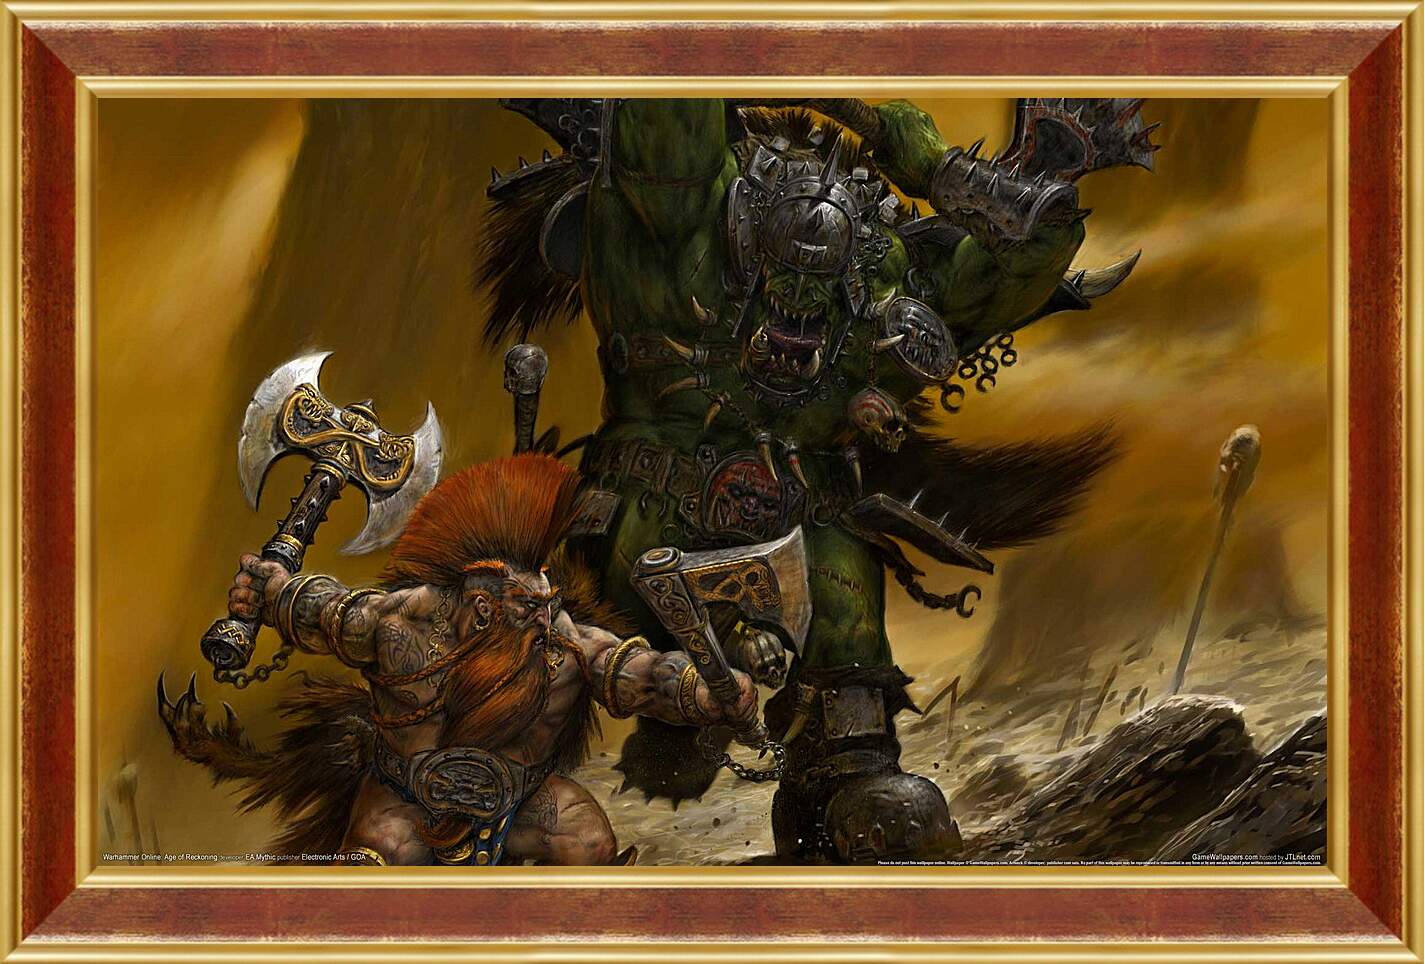 Картина в раме - Warhammer Online: Age Of Reckoning